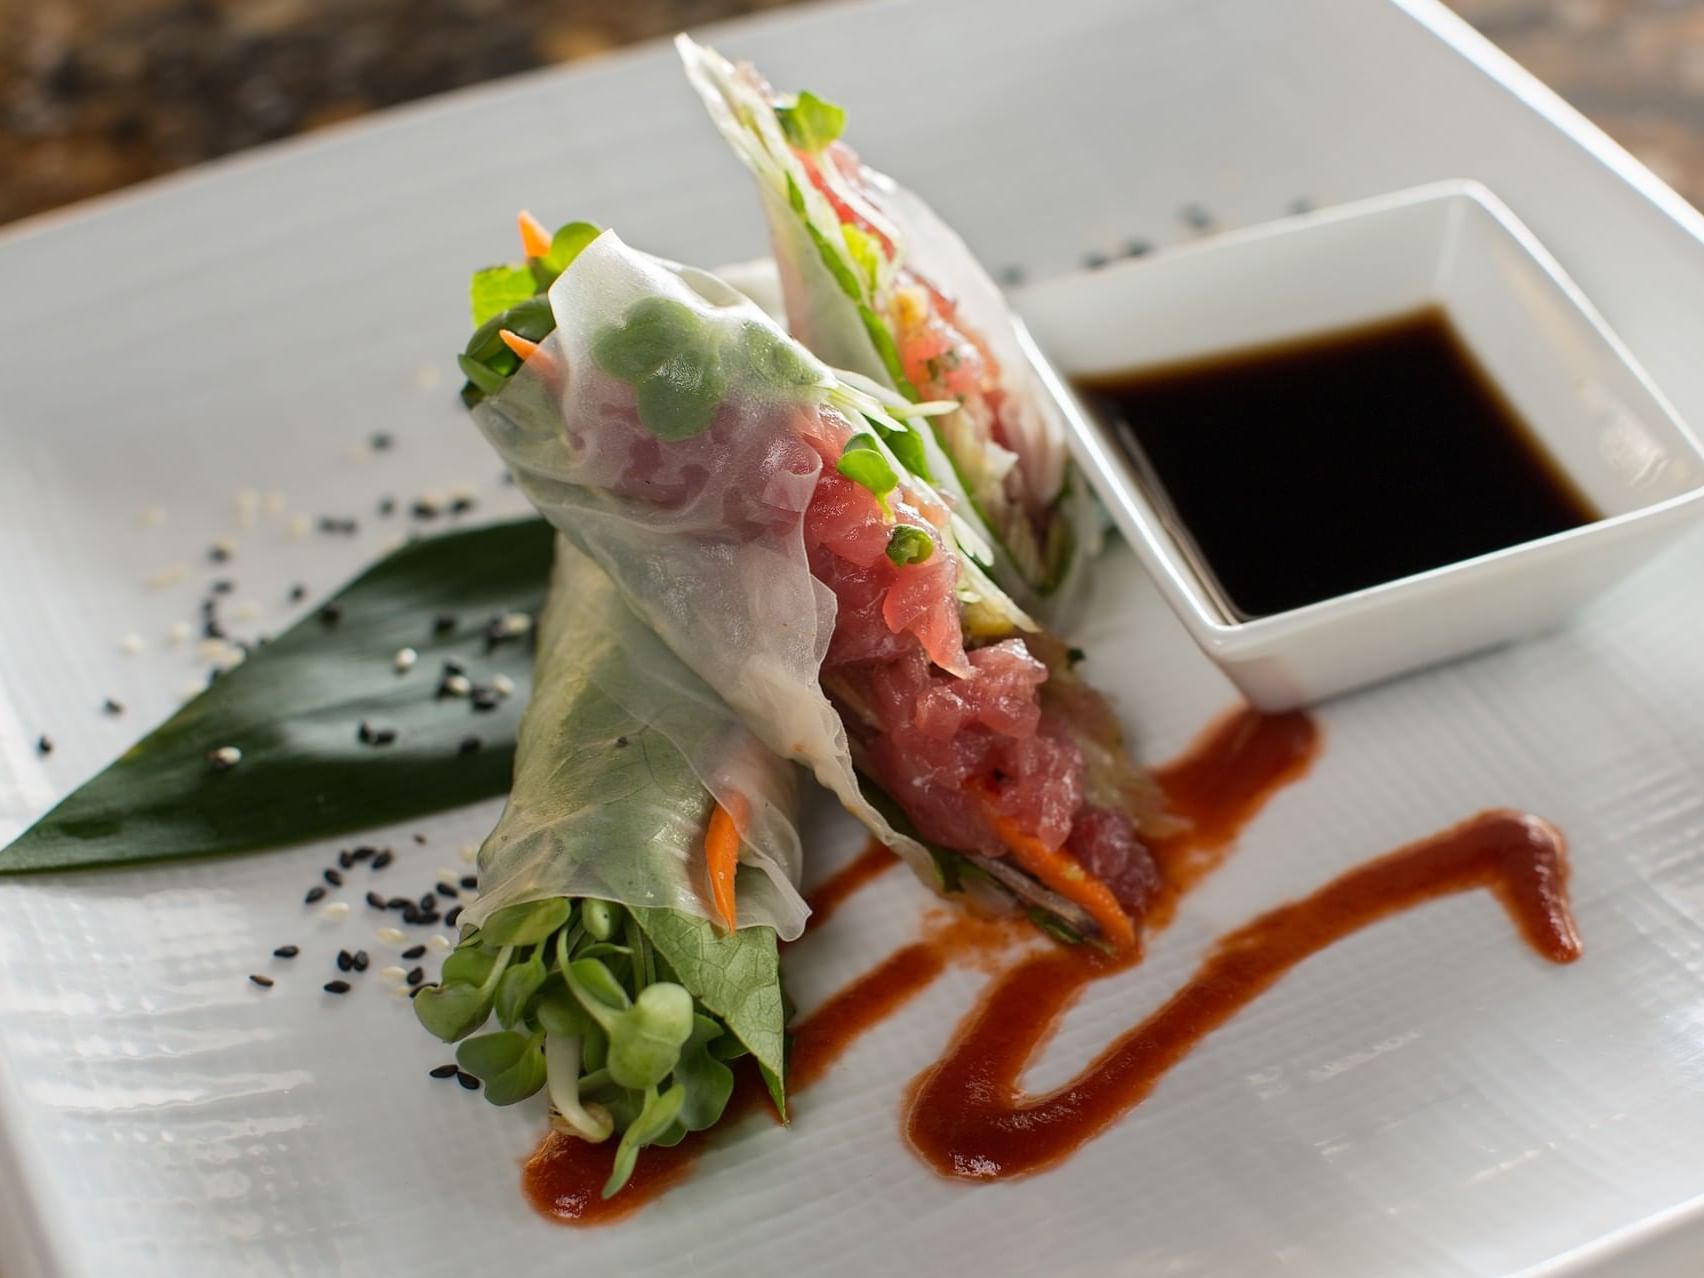 A wholesome dish in the Miso Phat Sushi at Maui Coast Hotel